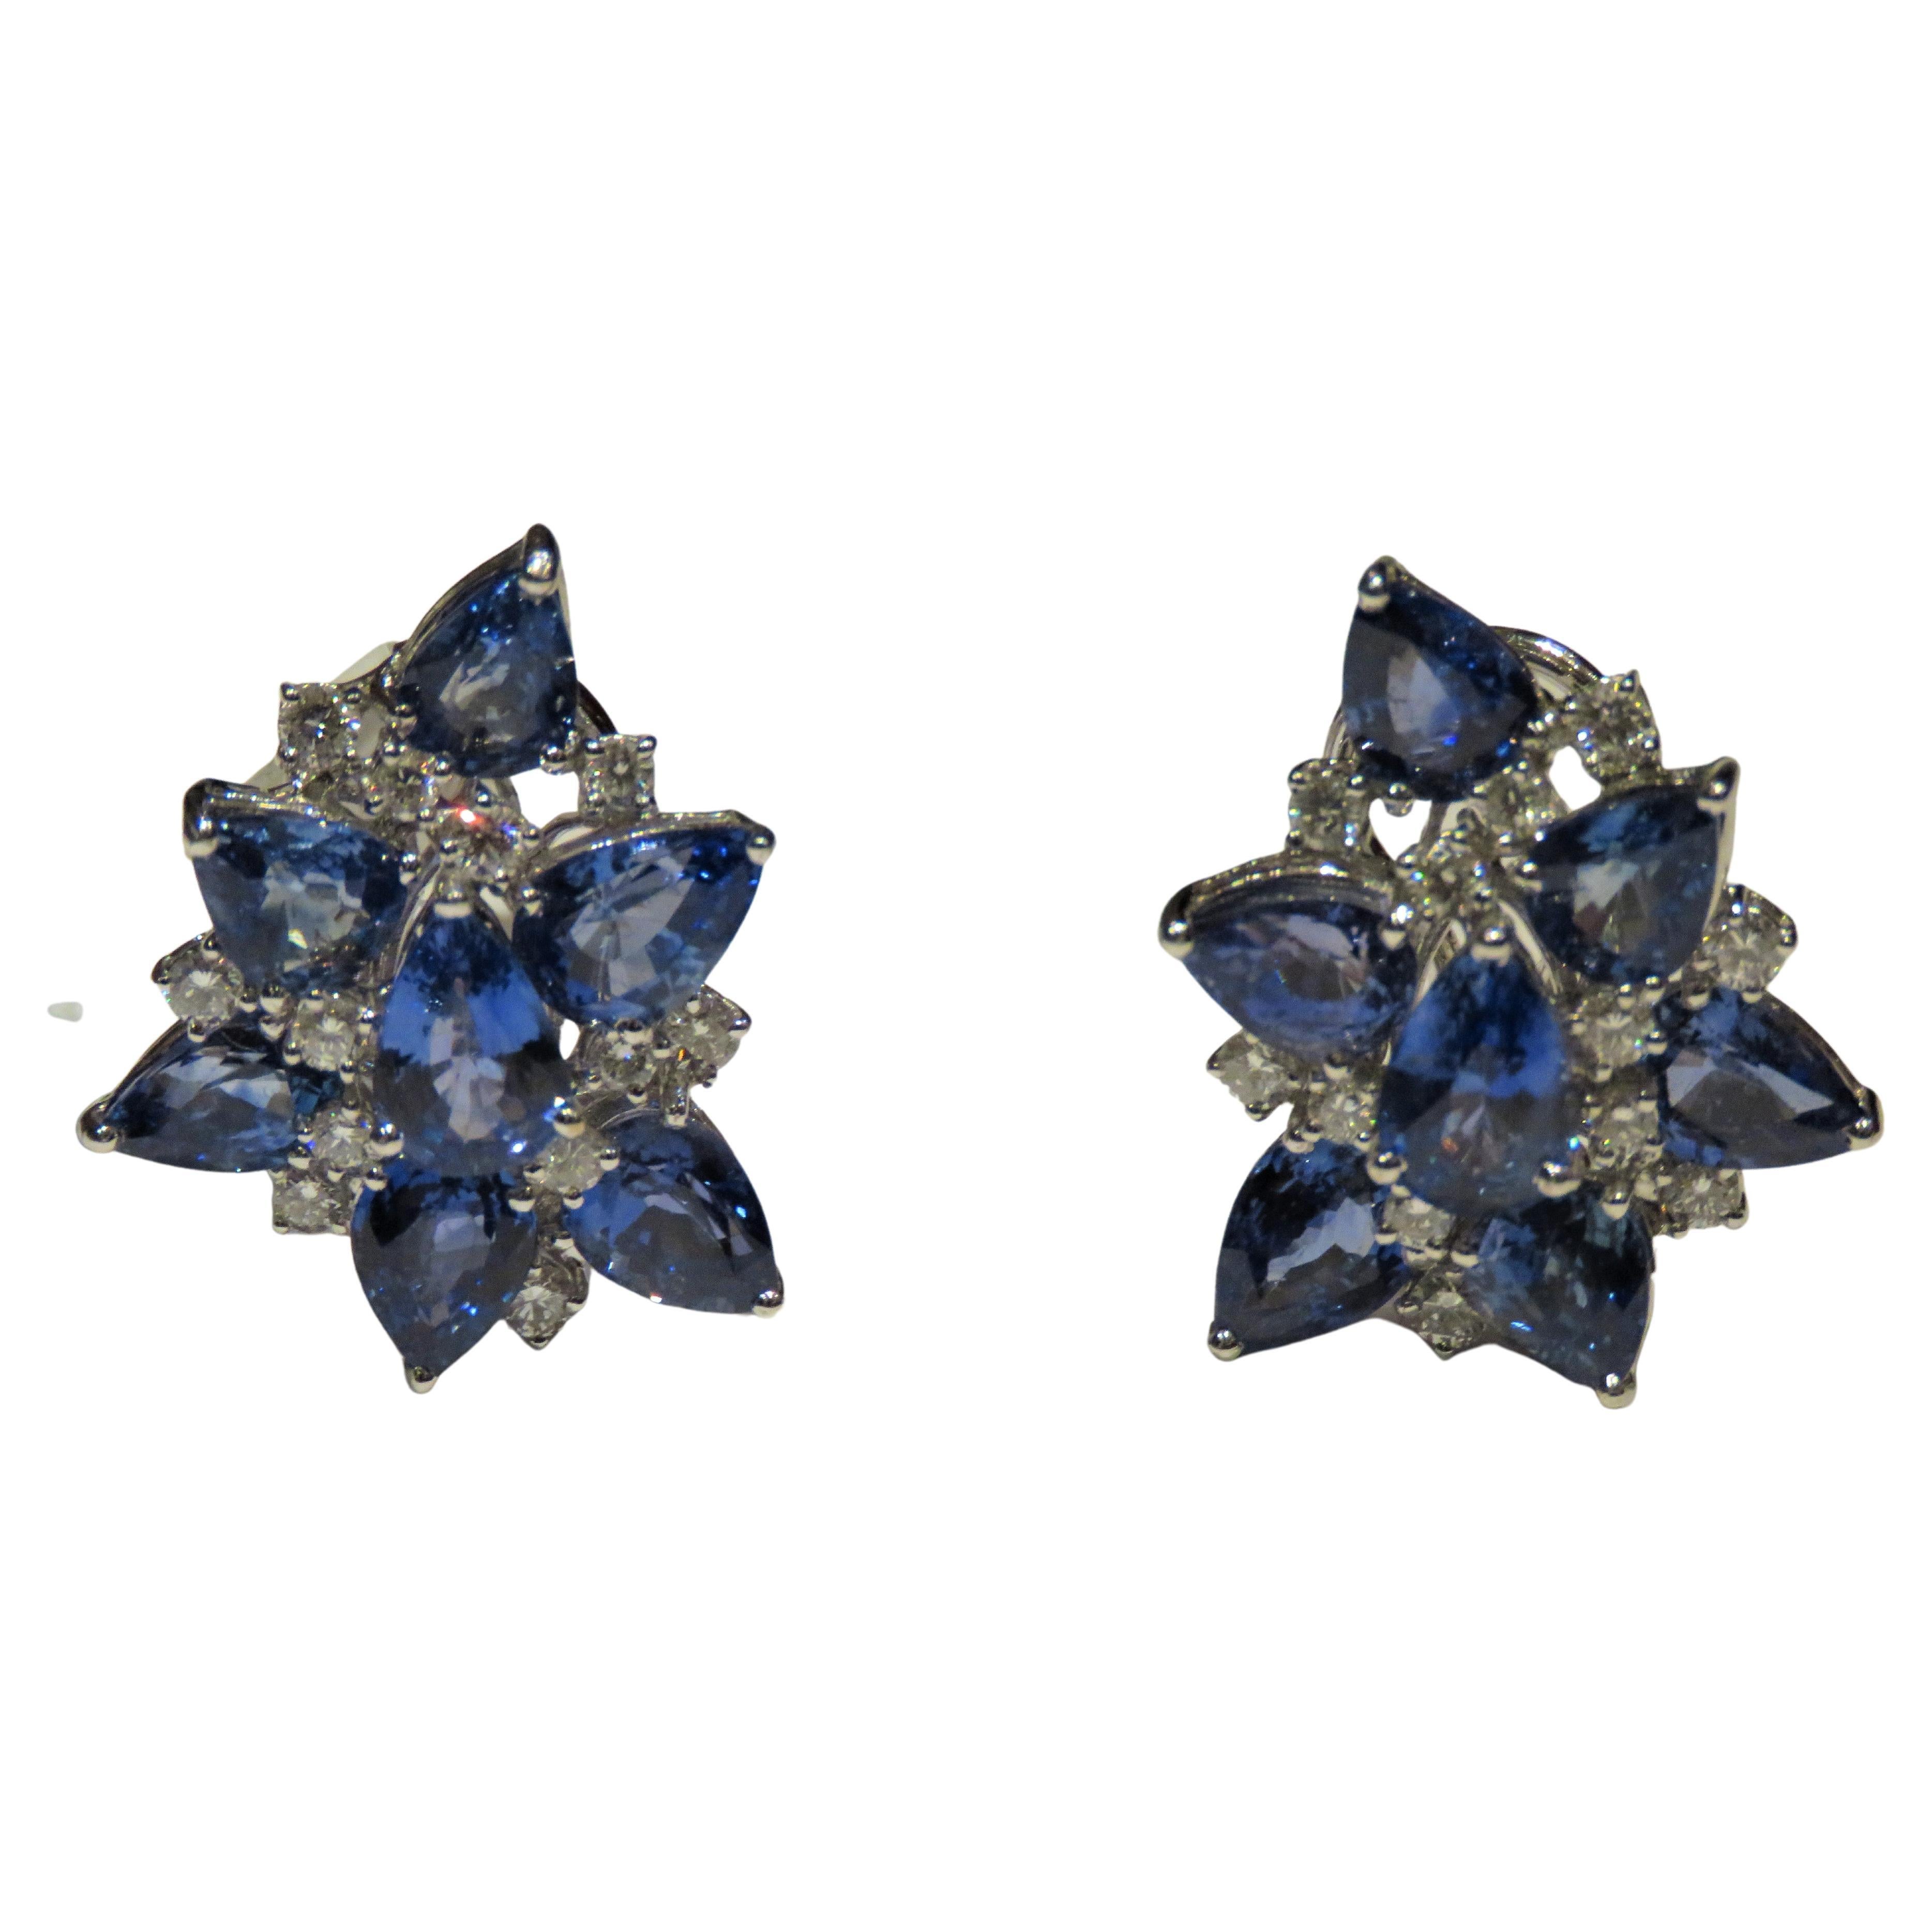 NWT $25, 800 18KT Gold Magnificent 17.50CT Blue Sapphire Diamond Cluster Earrings